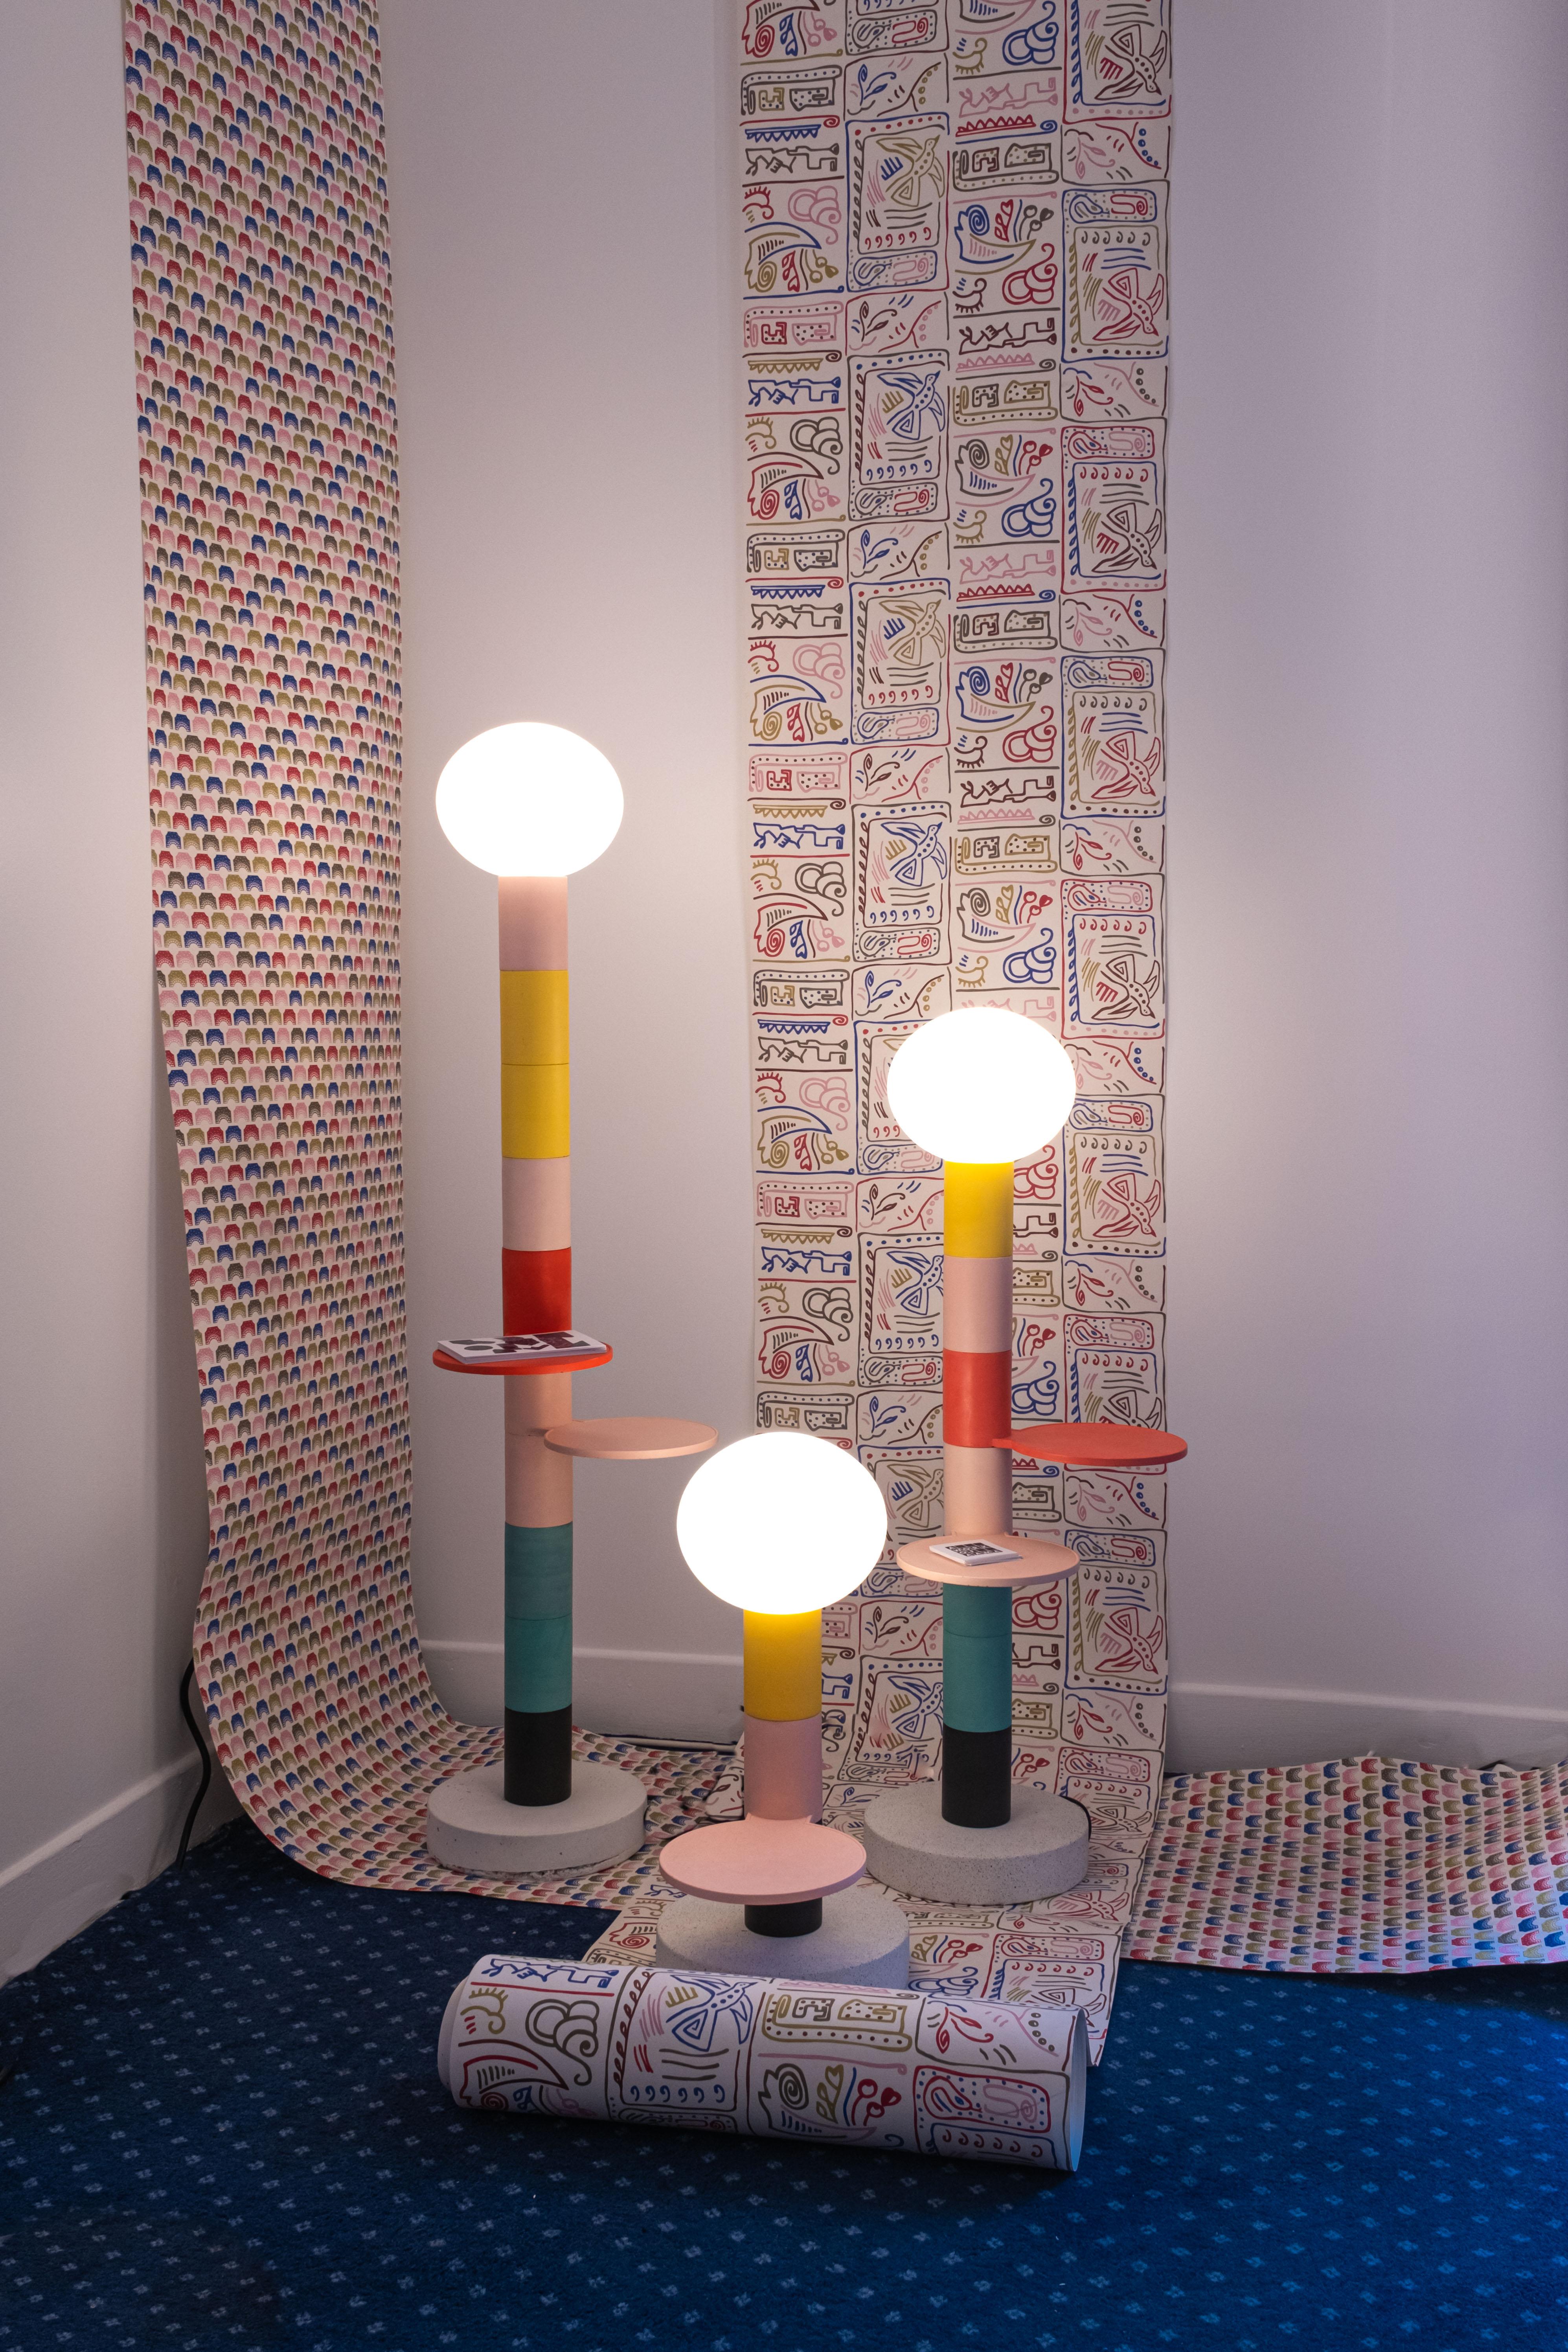 French Ciluzio Lisa by AAMA Design / Modular Pop Floor Lamp Made by Hand in France For Sale